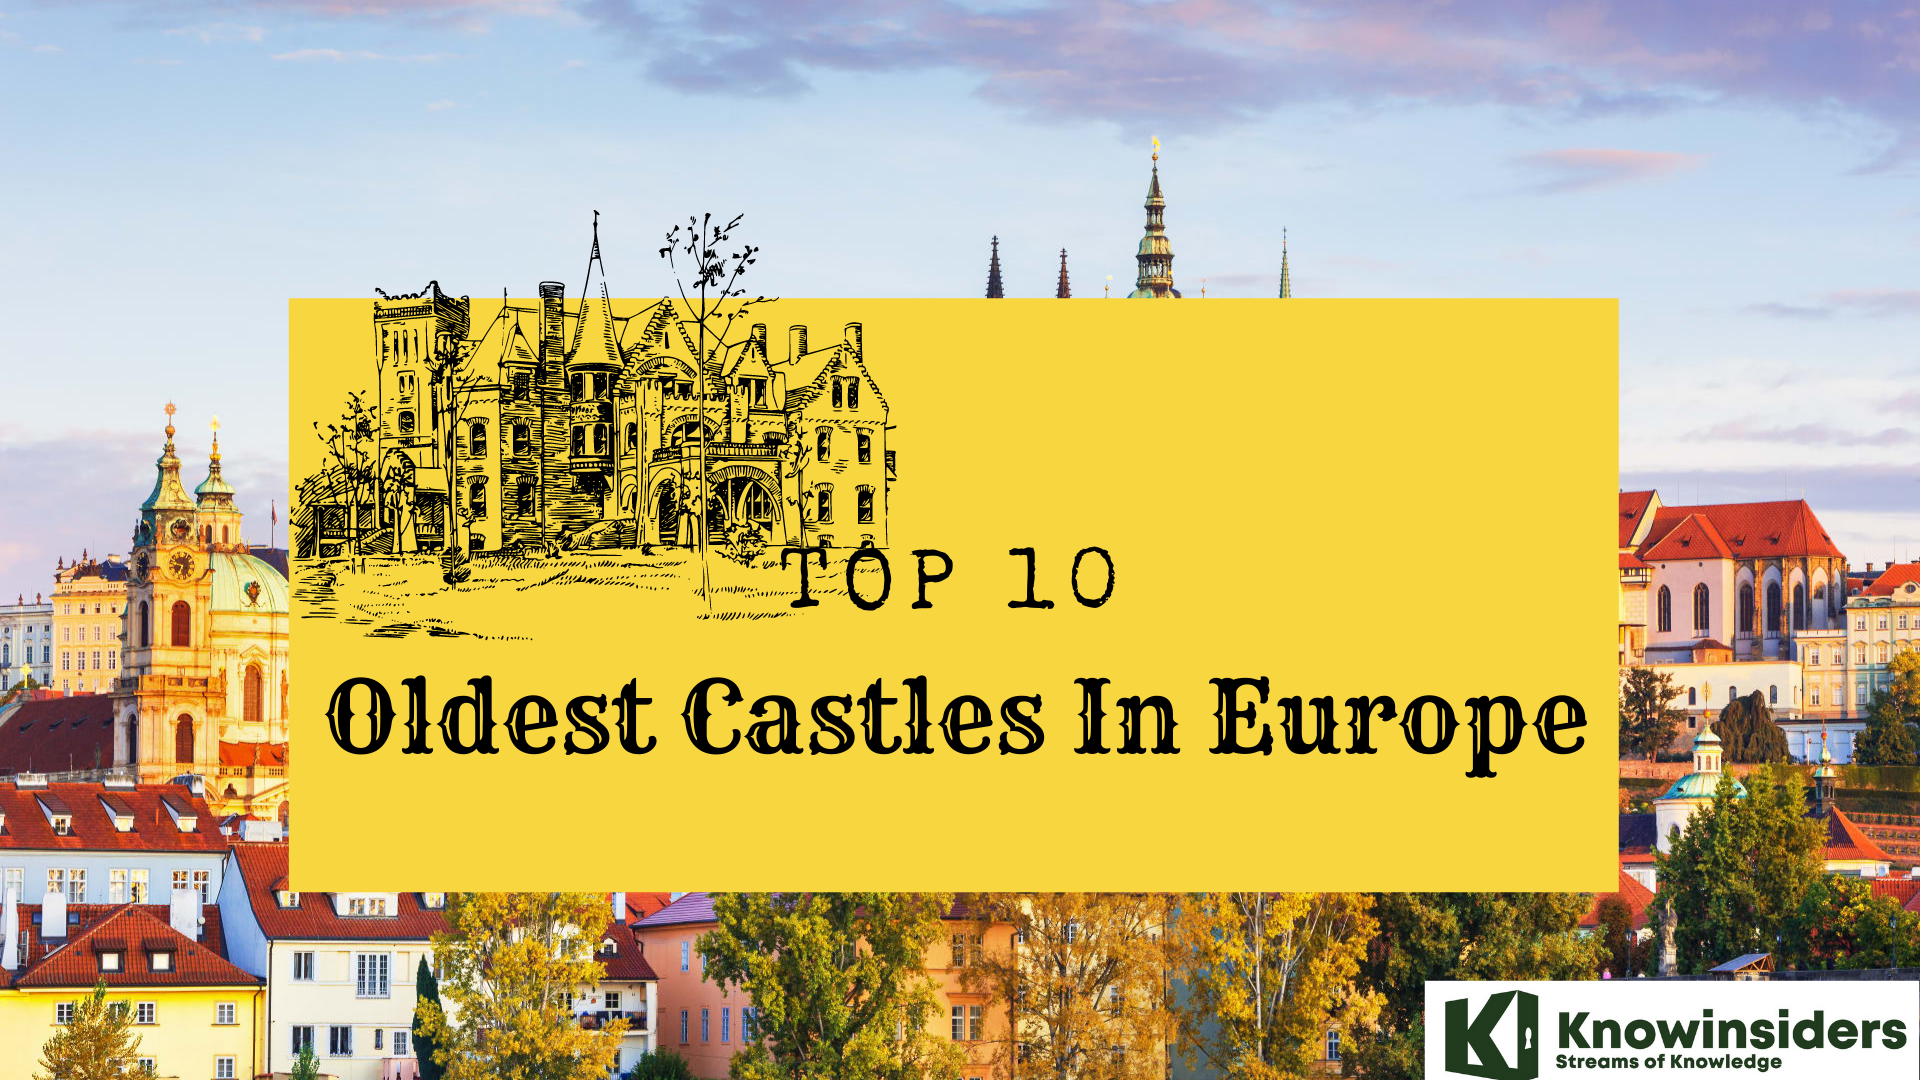 Top 10 Oldest Castles in Europe - The First Castles